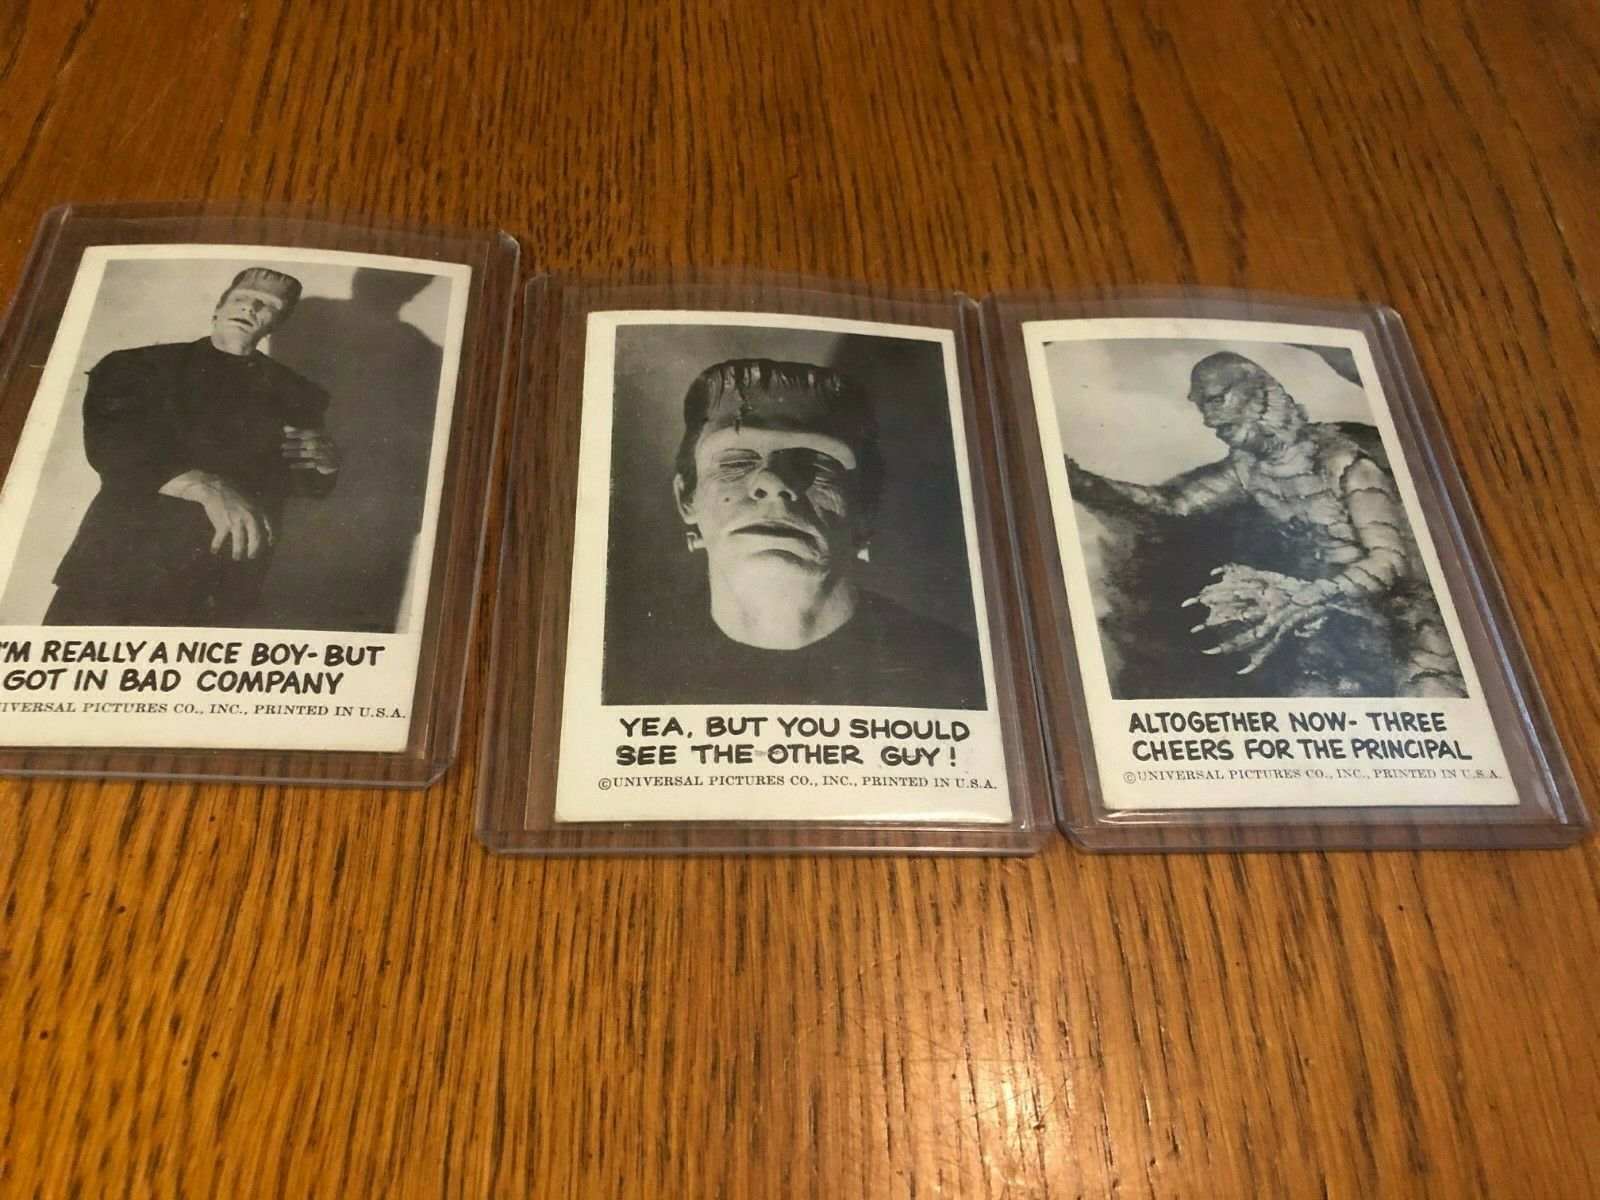 Universal Pictures Classic Monster Cards - Frankenstein And Creature From Black